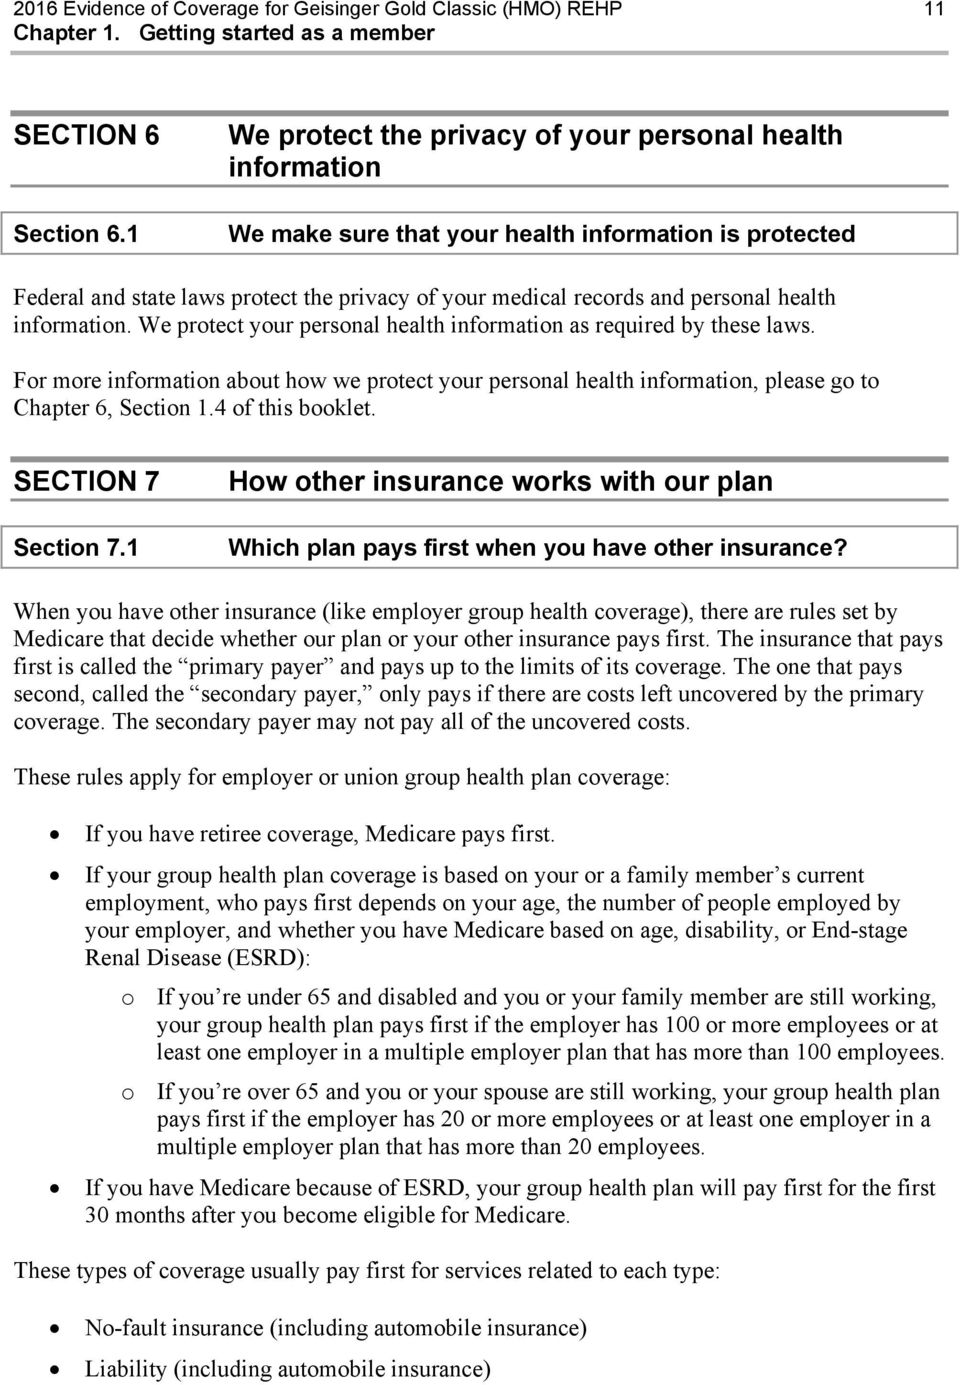 health information. We protect your personal health information as required by these laws.